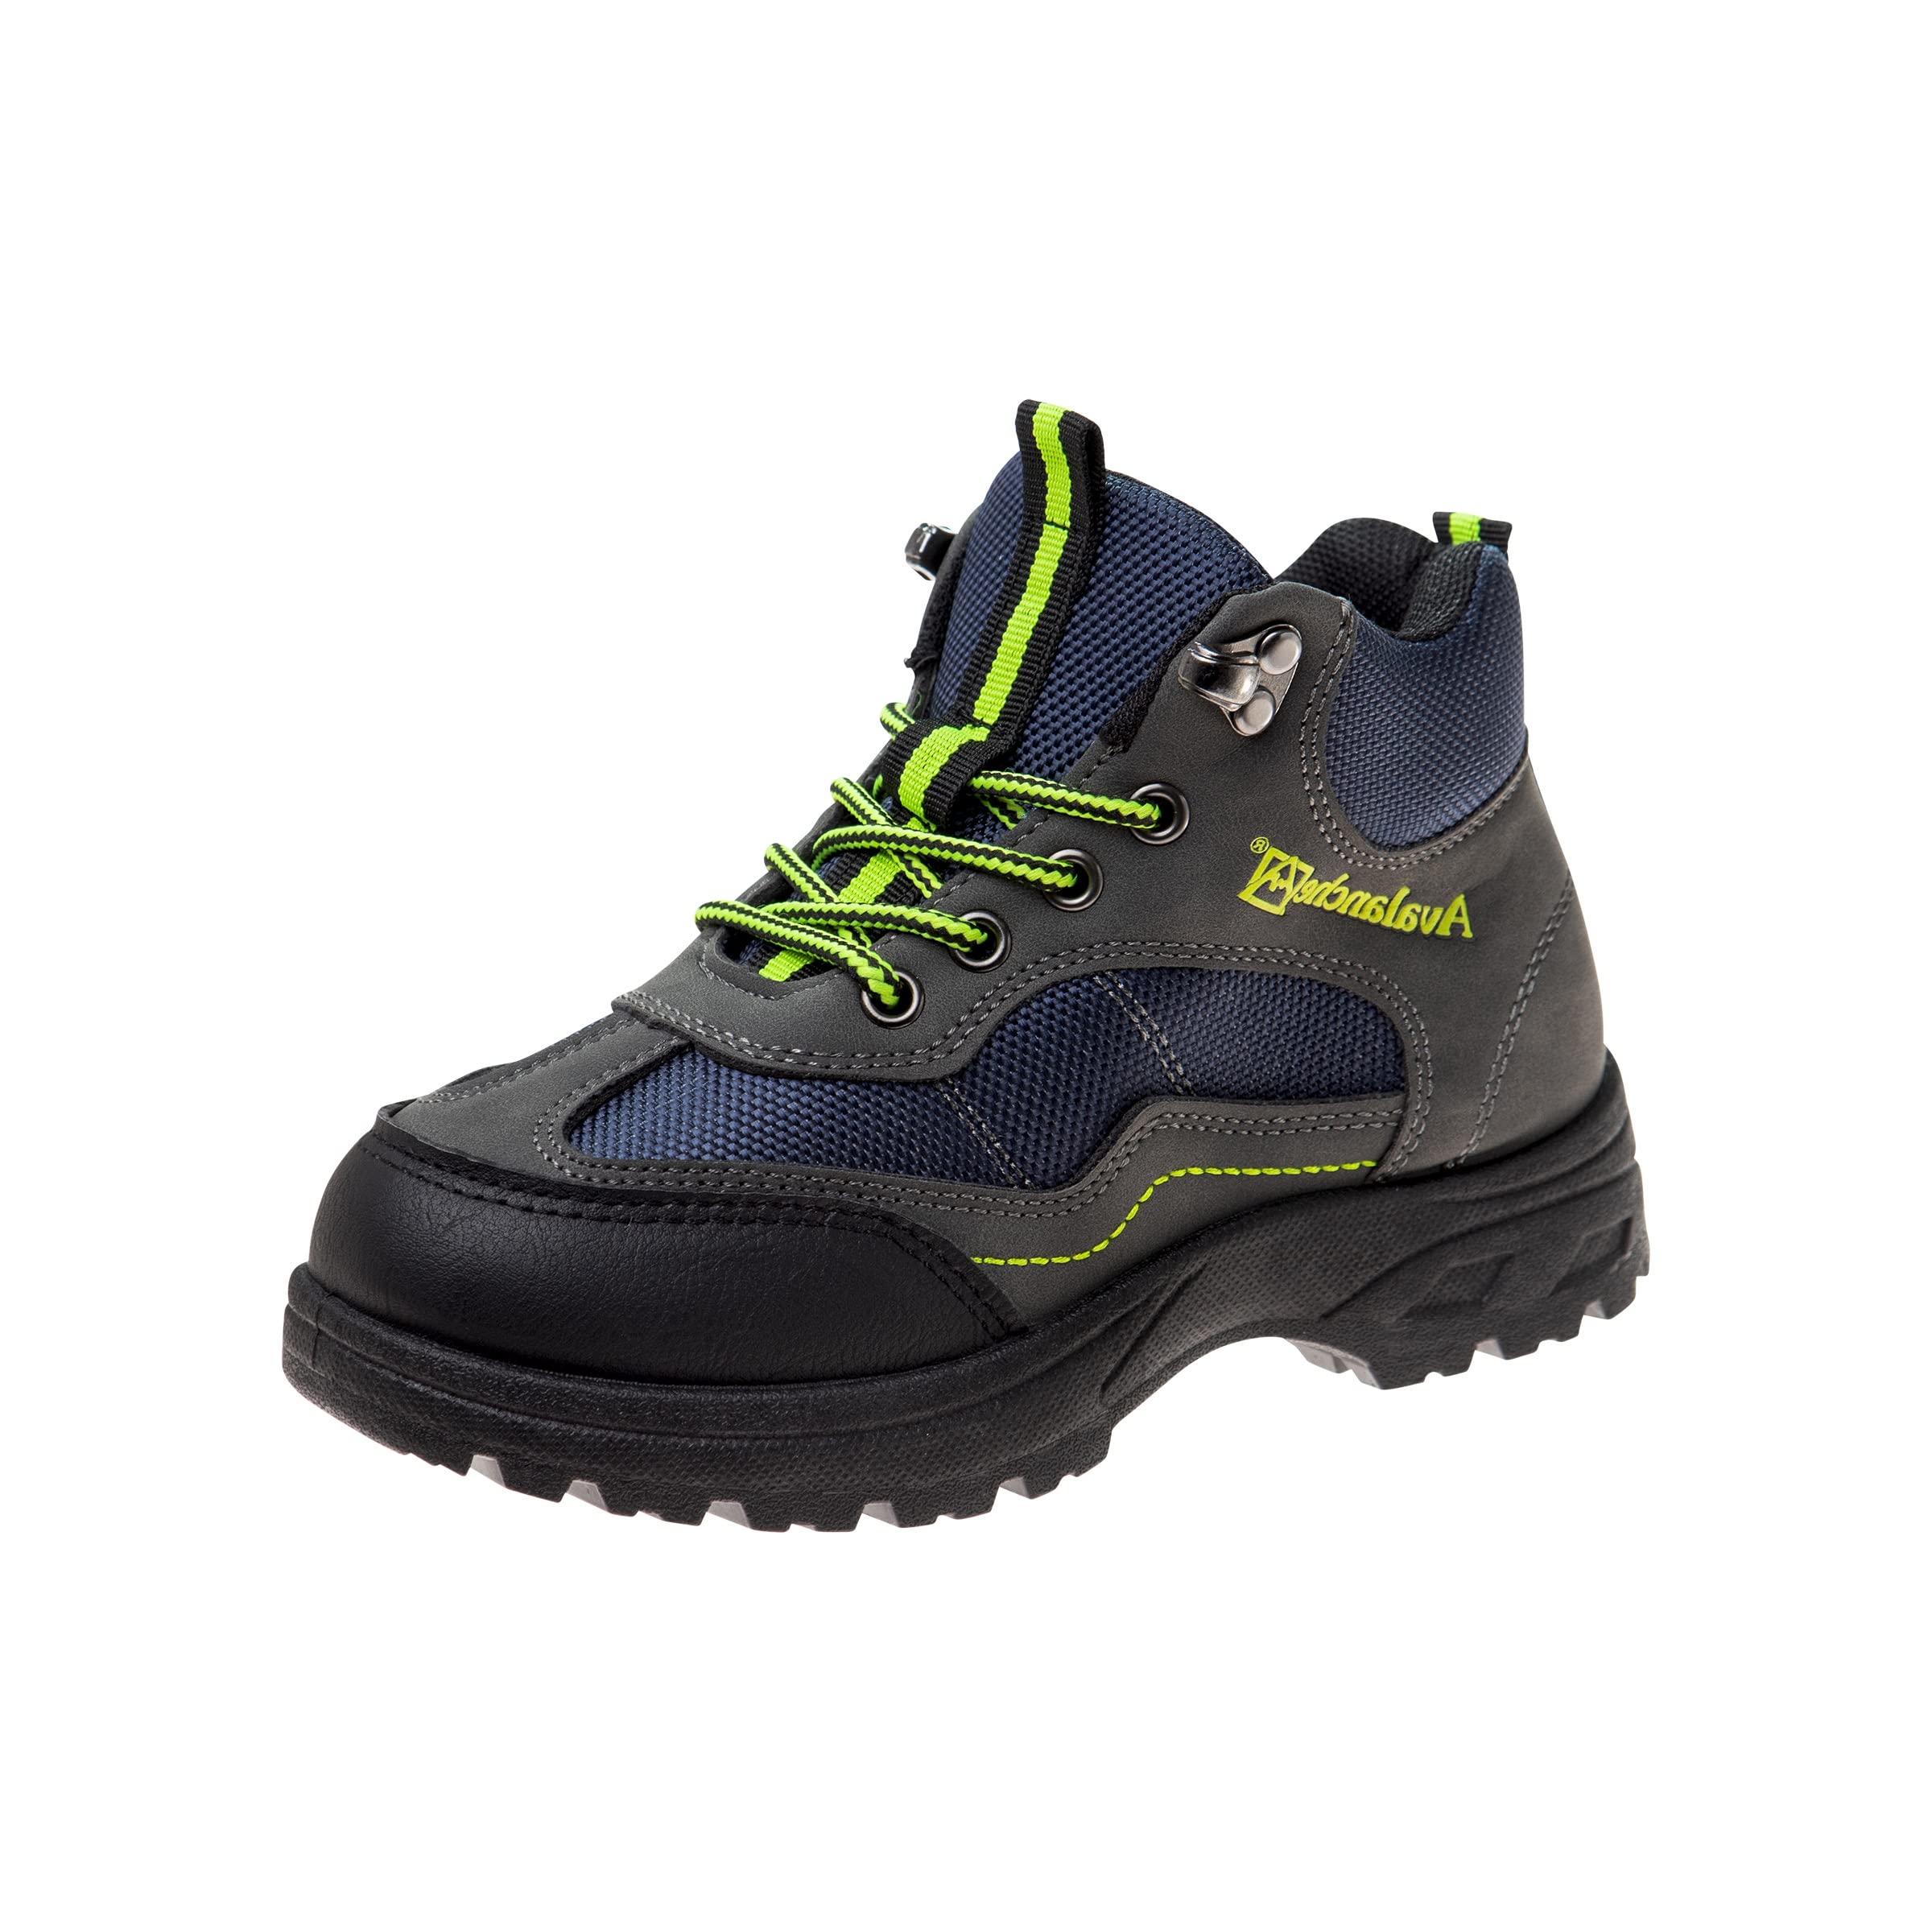 Avalanche Unisex-Child Boys Kids Hiking Waterproof Lace-up Comfort Outdoor Casual Urban Boots